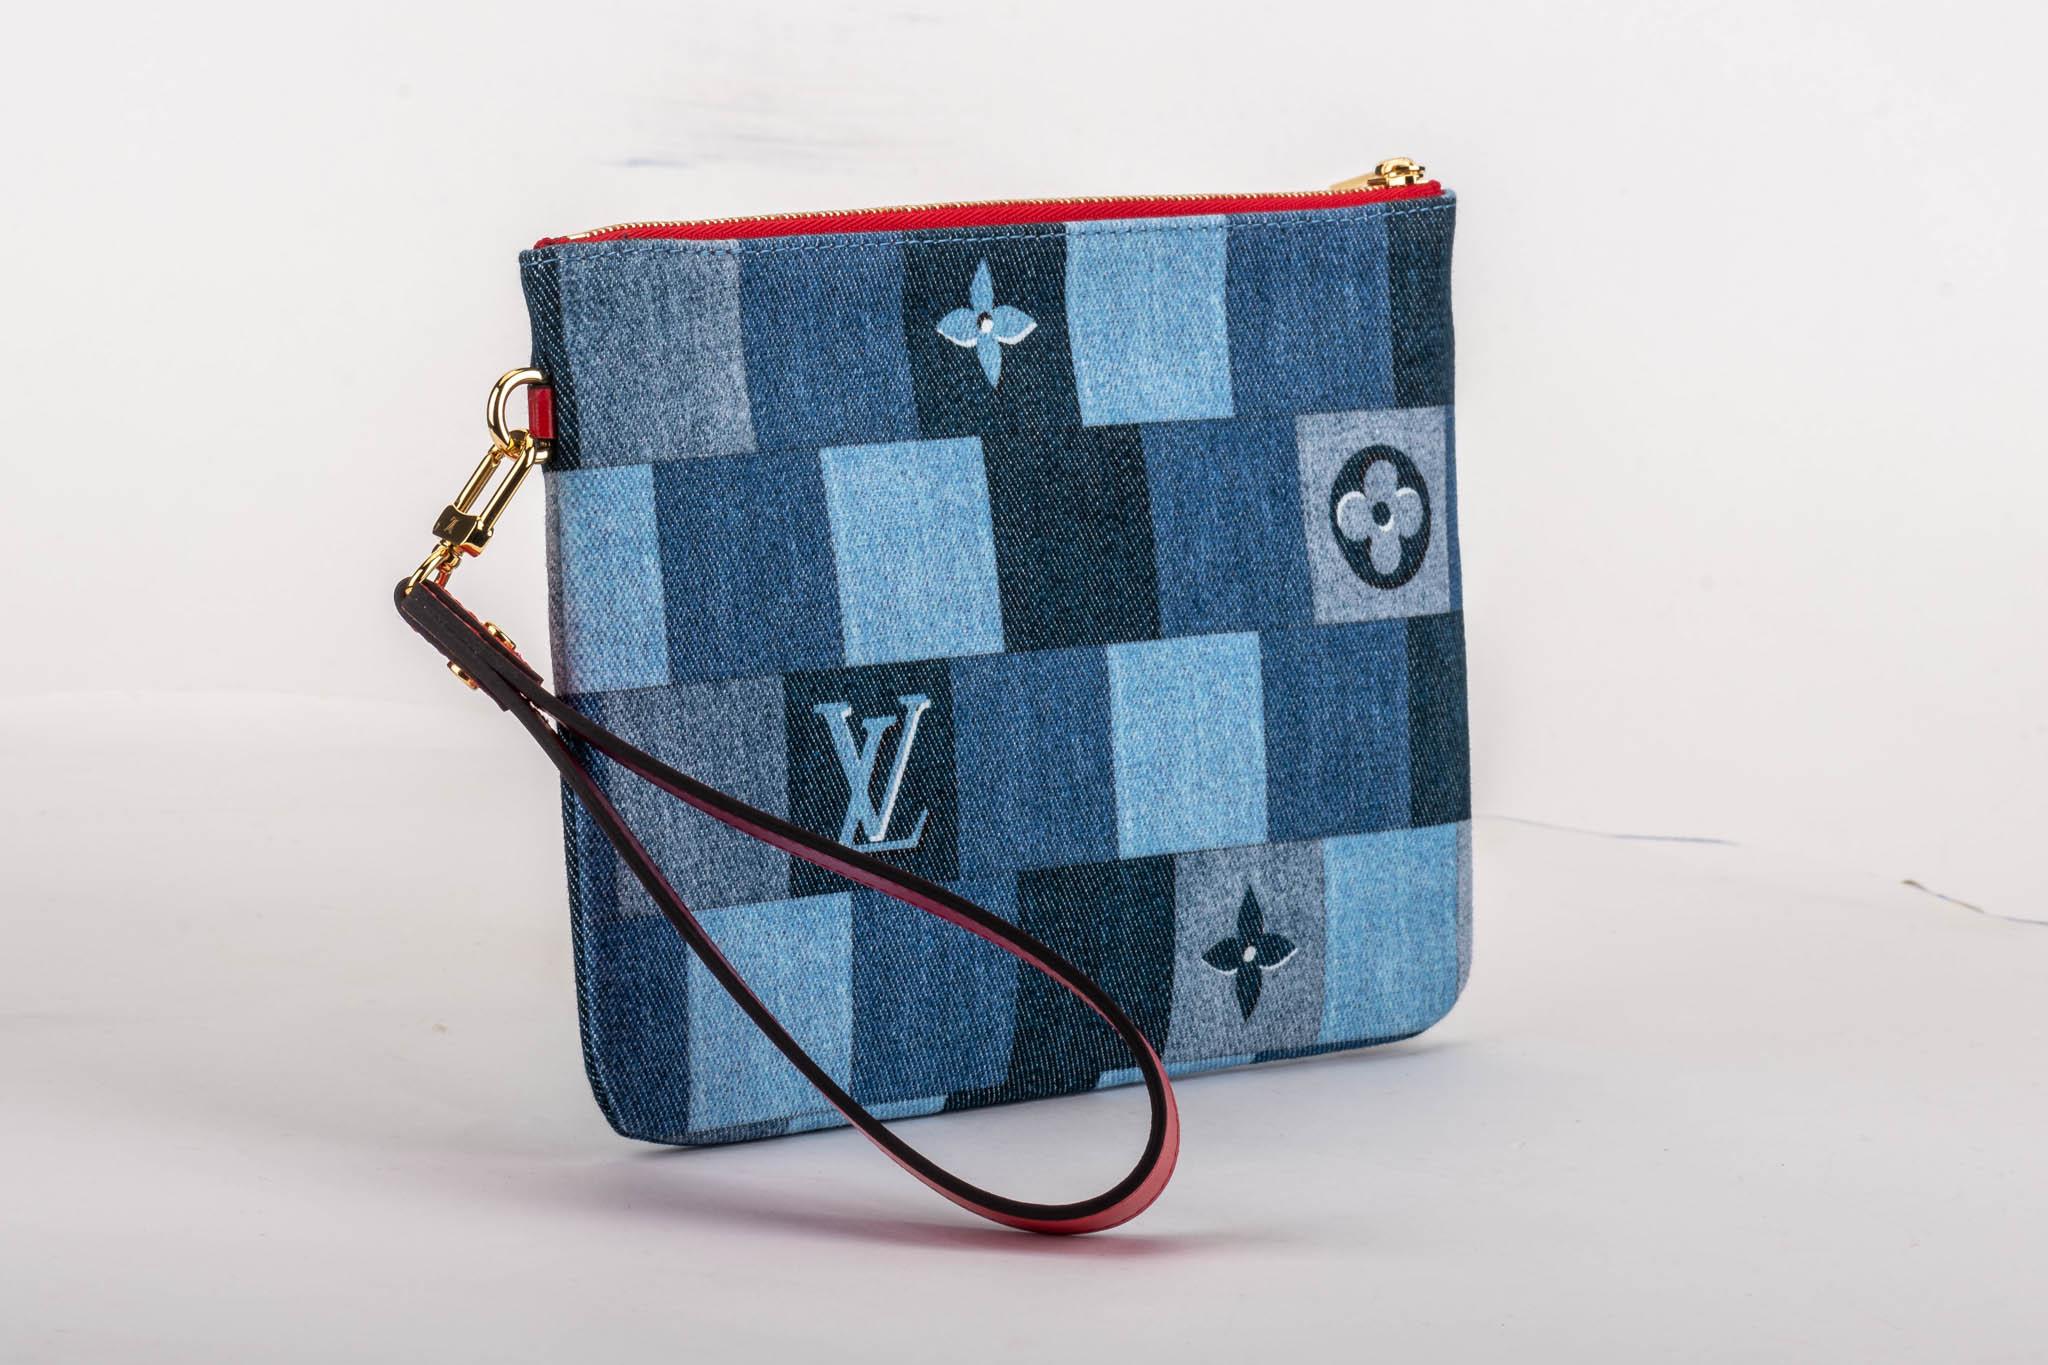 Louis Vuitton limited edition denim pouchette with red leather details. Detachable handle. Comes with booklet, dust cover, original box and ribbon.